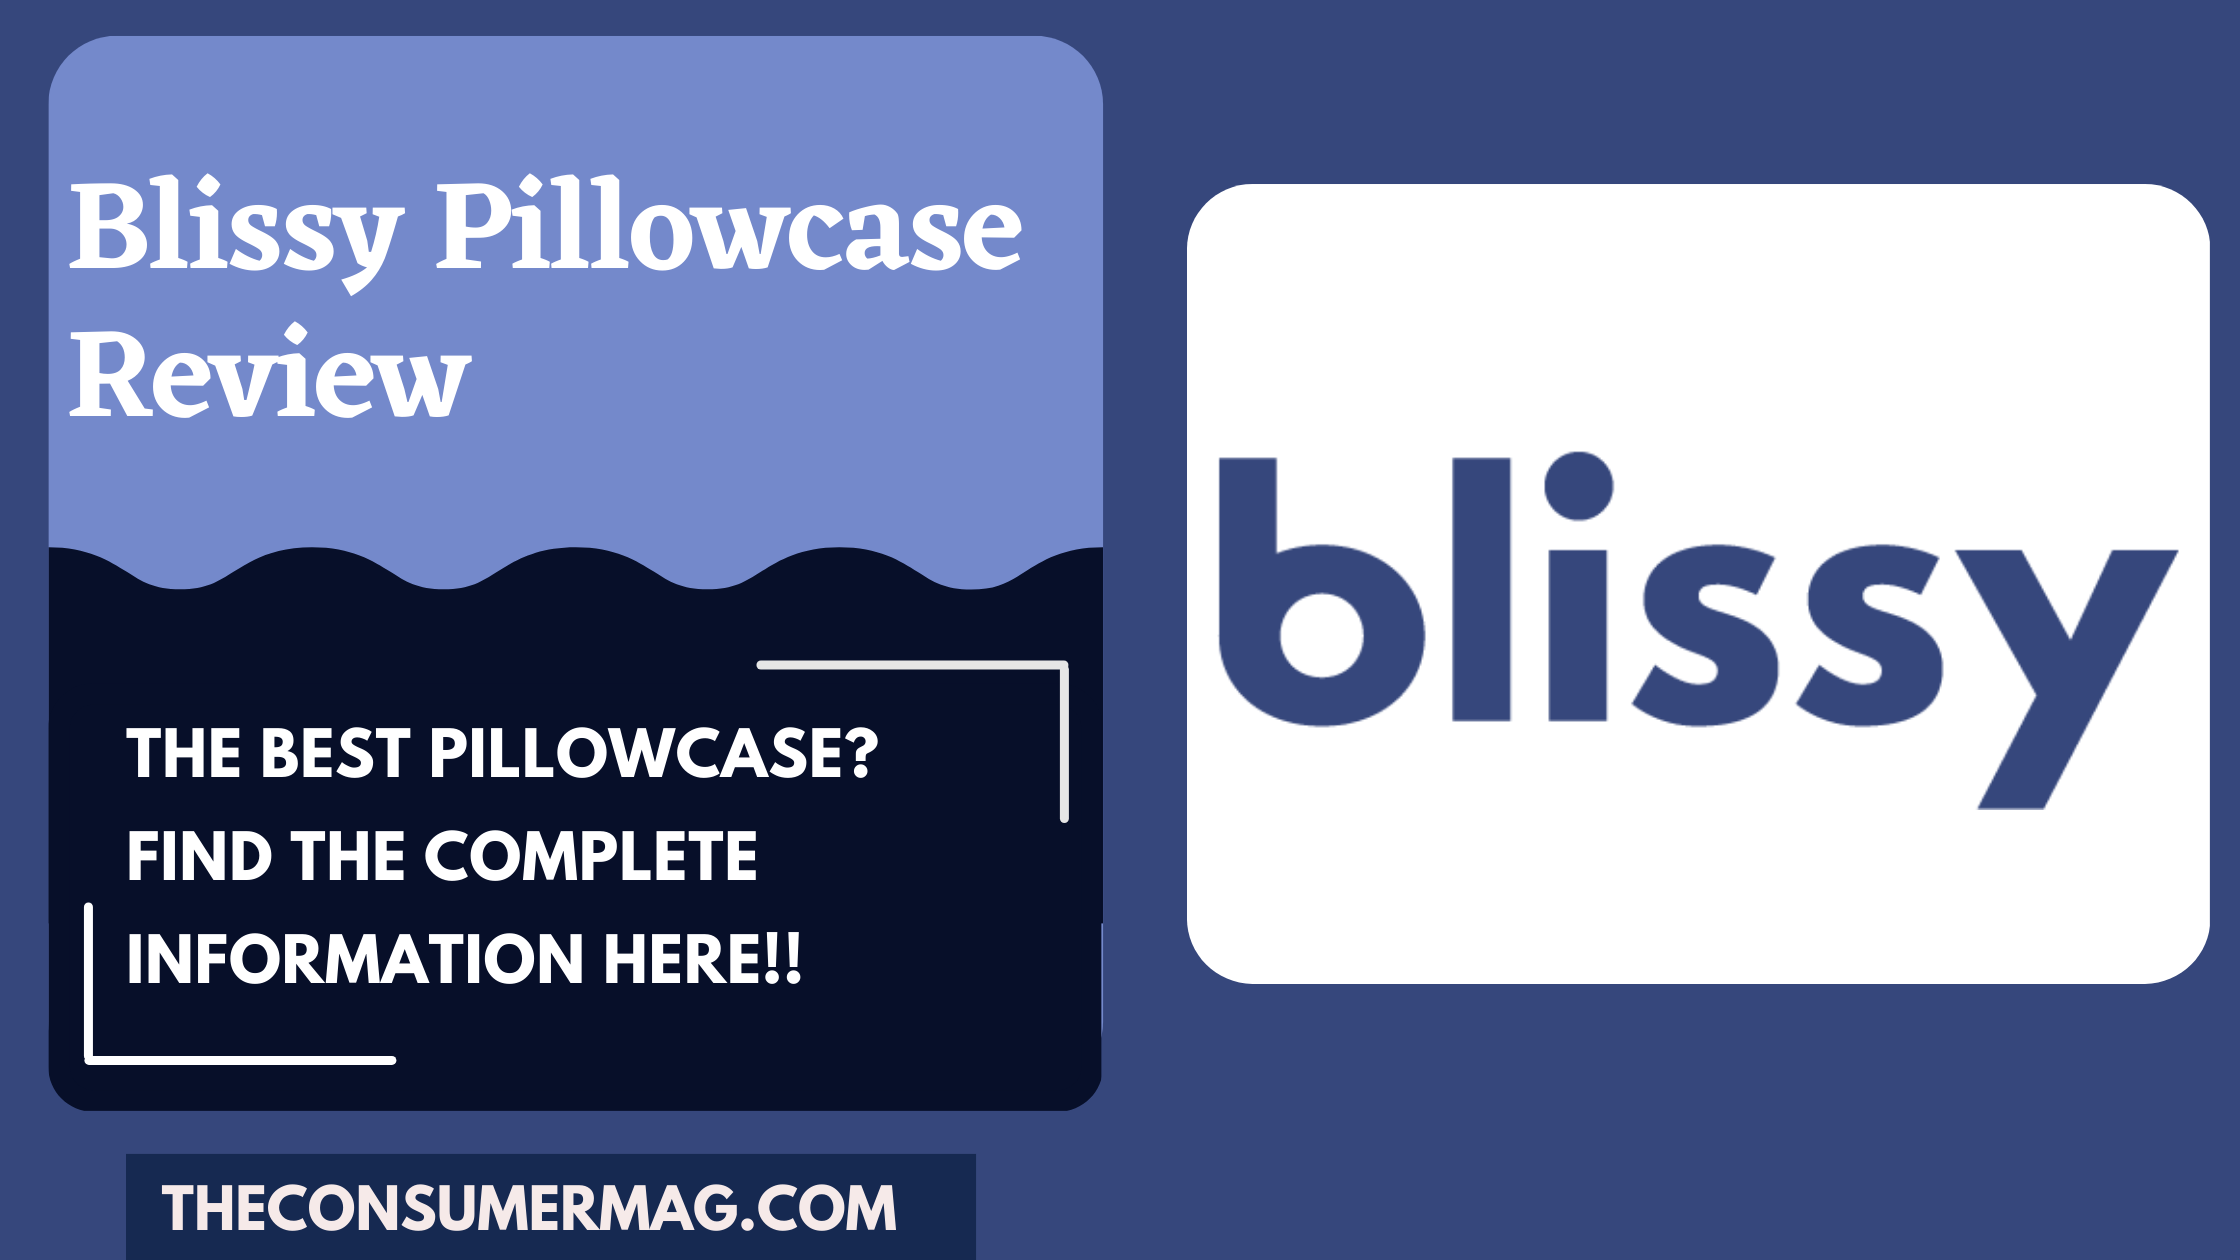 Blissy Pillowcase featured image